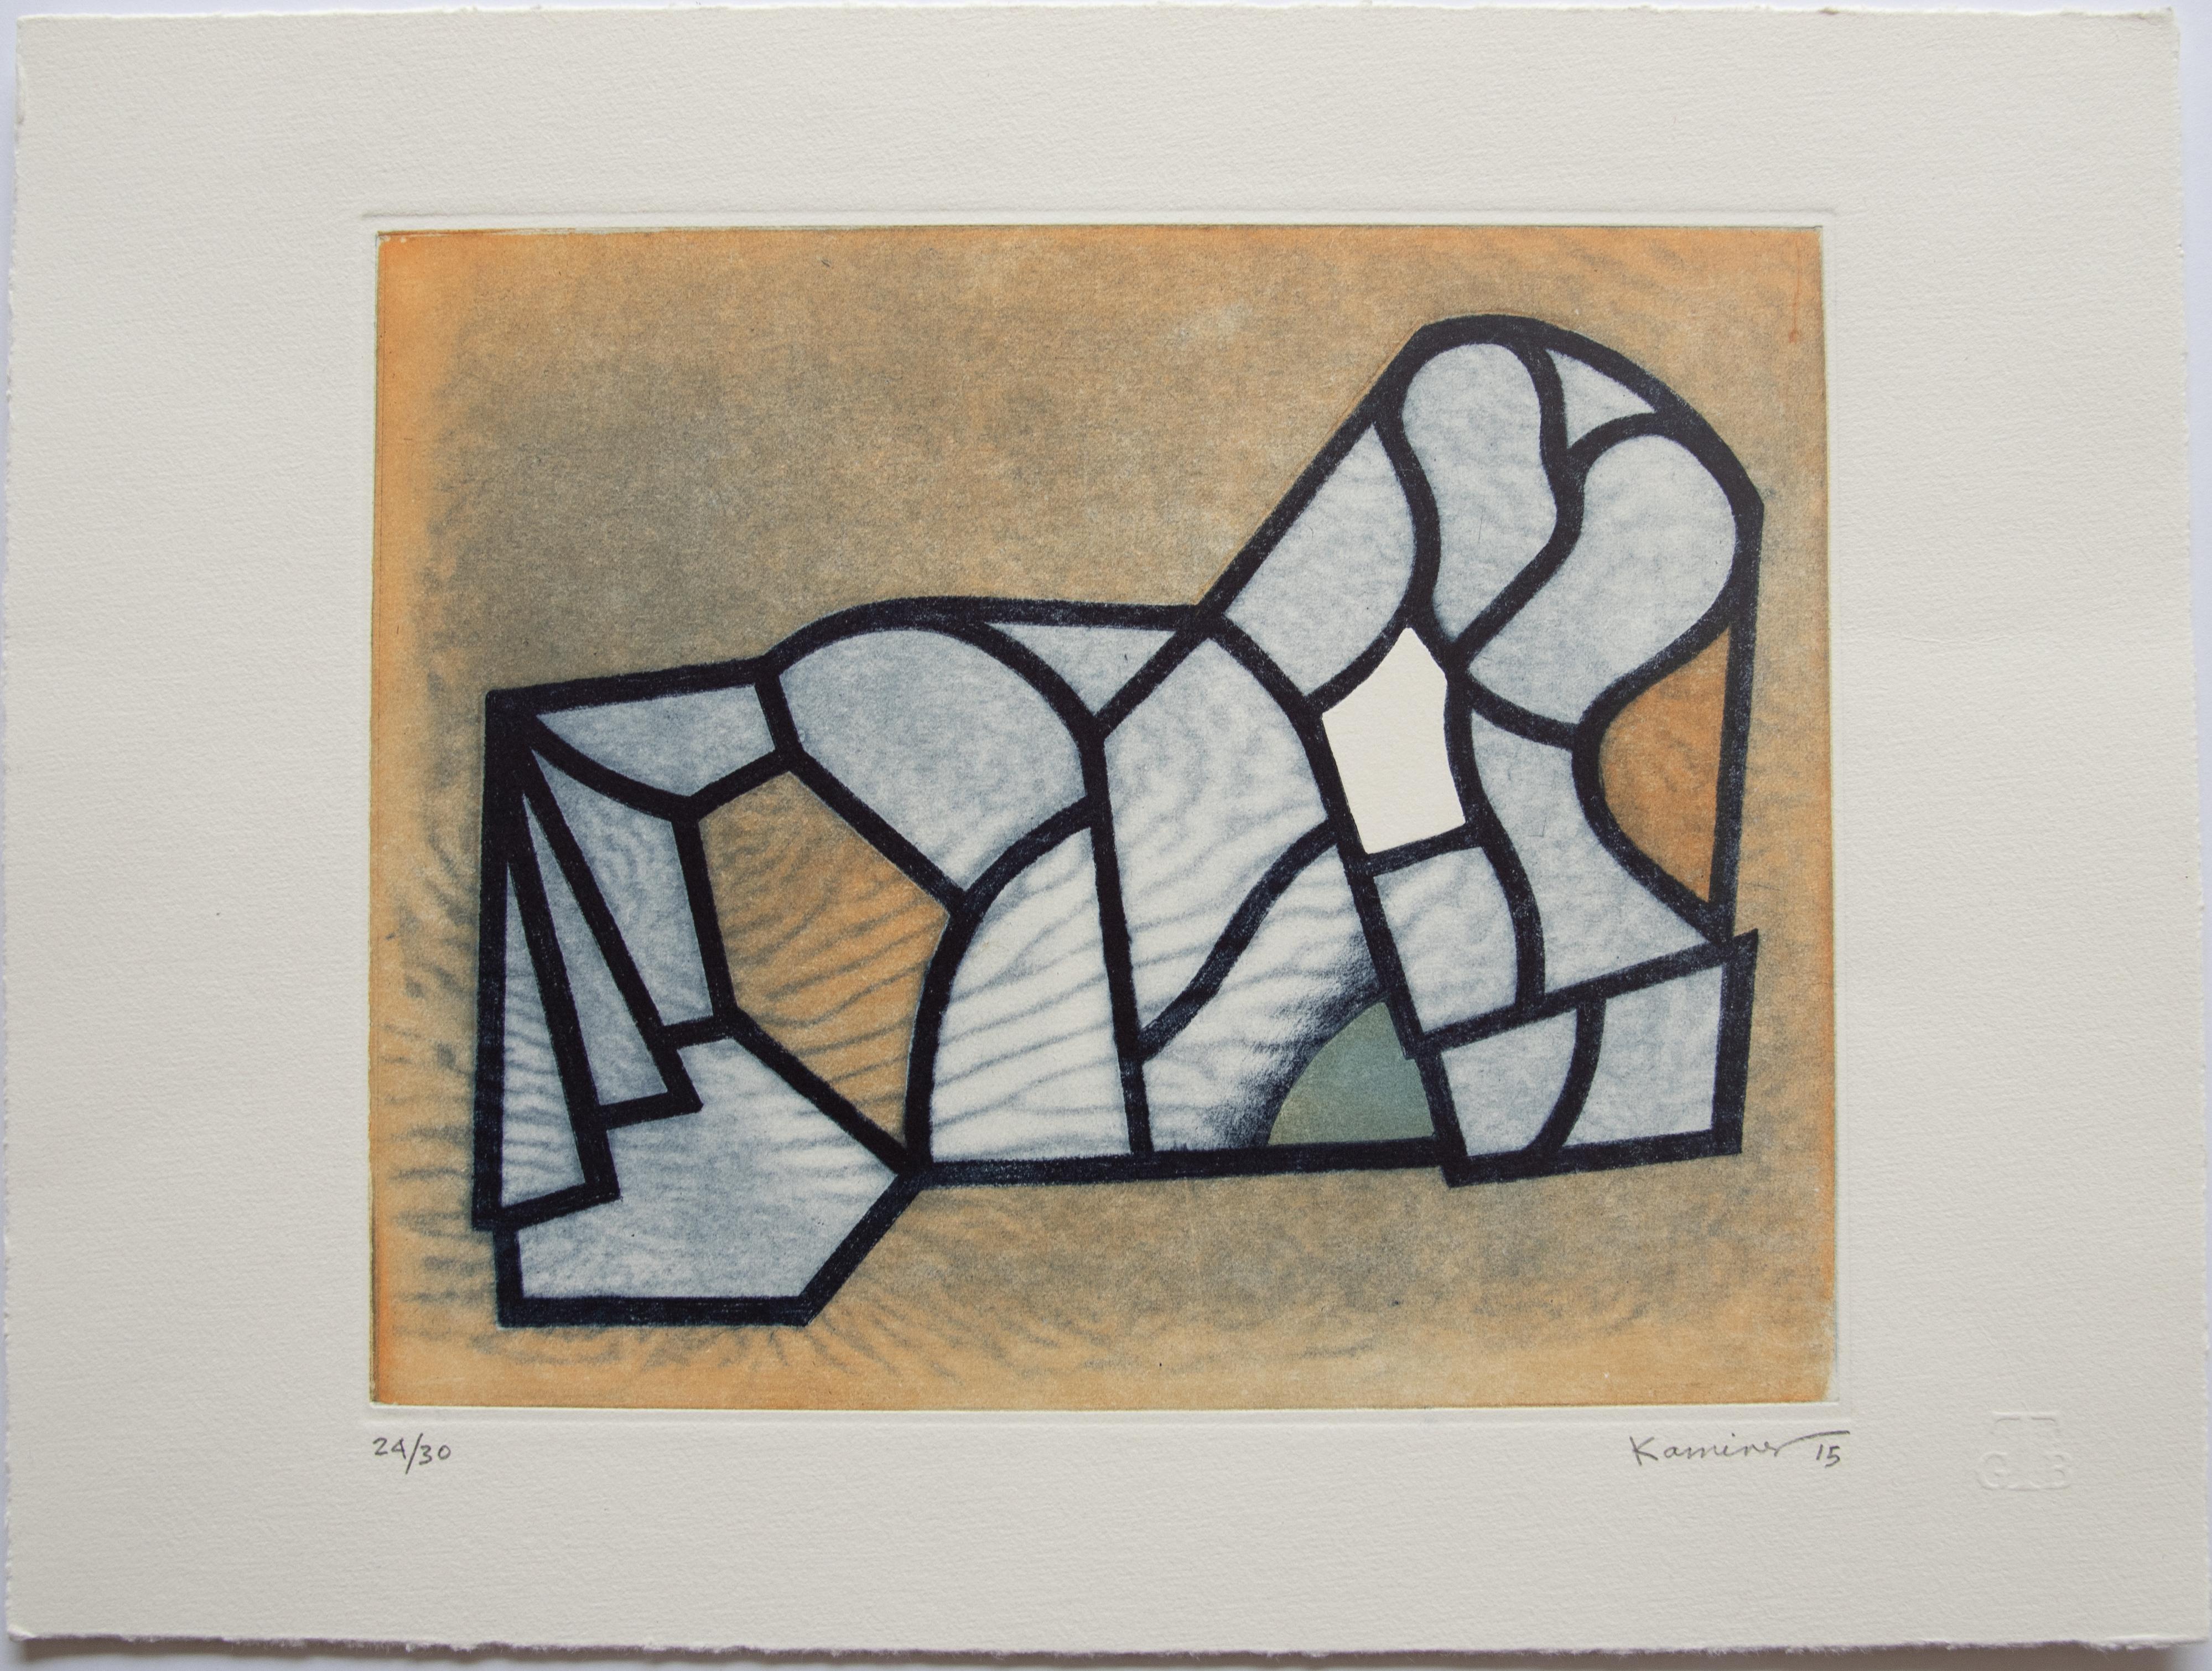 This work is engraved on copper plate with 100% cotton paper. 
Etching, aquatint, drypoint. 
Edition 24/ 30

About the artist
Mexican contemporary painter and sculptor, Saúl Kaminer (1952), is best known for his abstract pieces containing